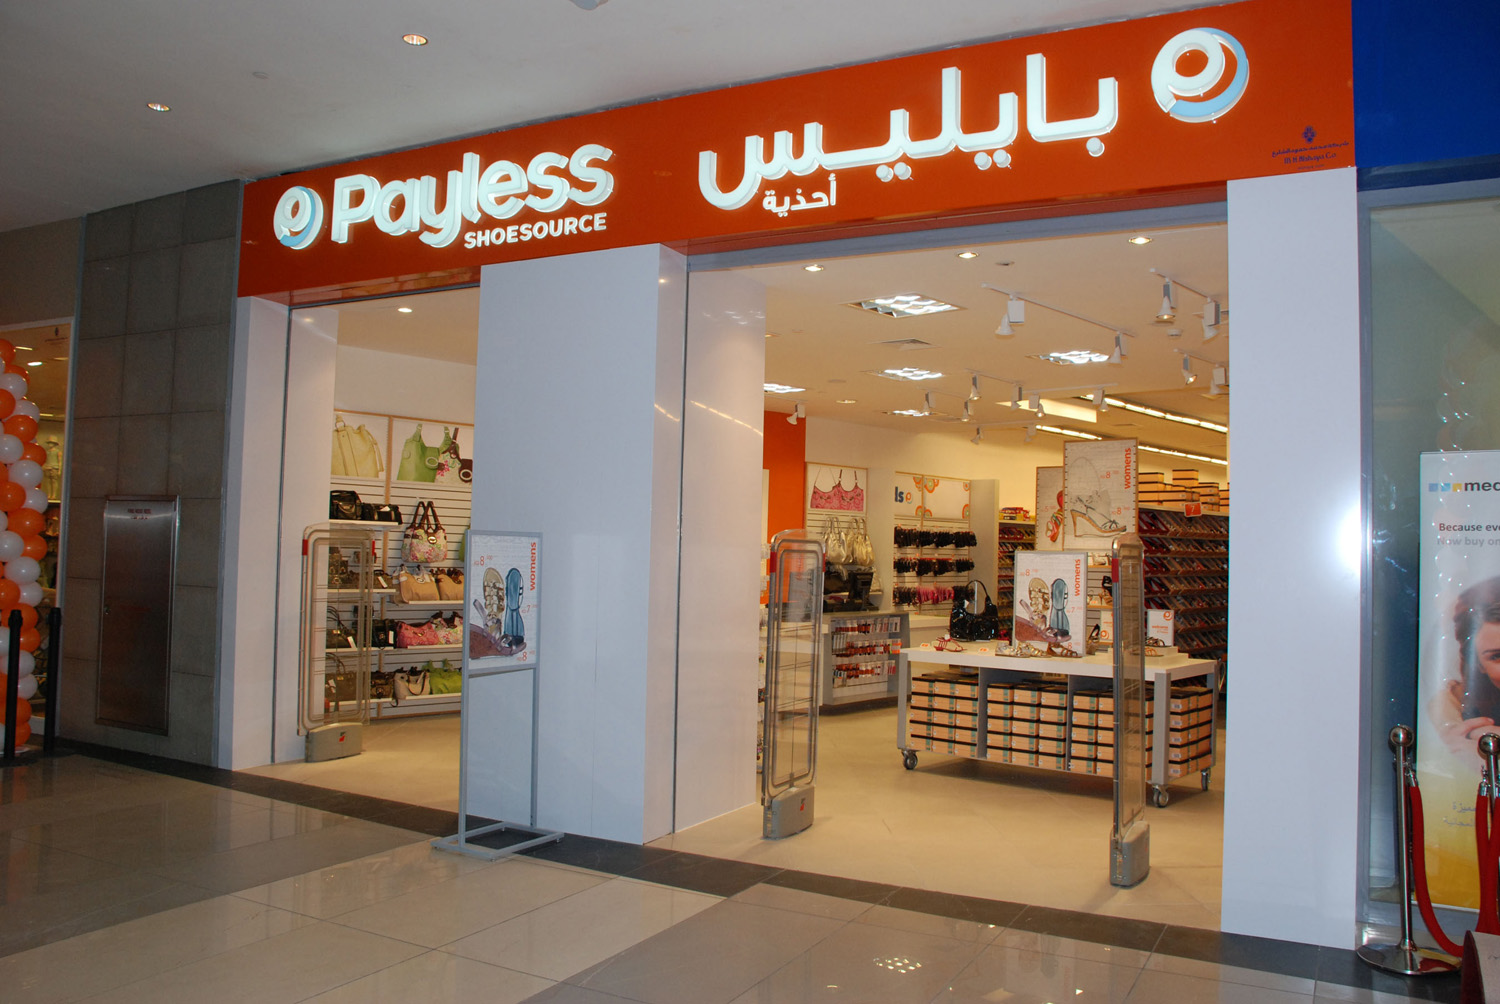 Payless ShoeSource Opens Stores in the Middle East